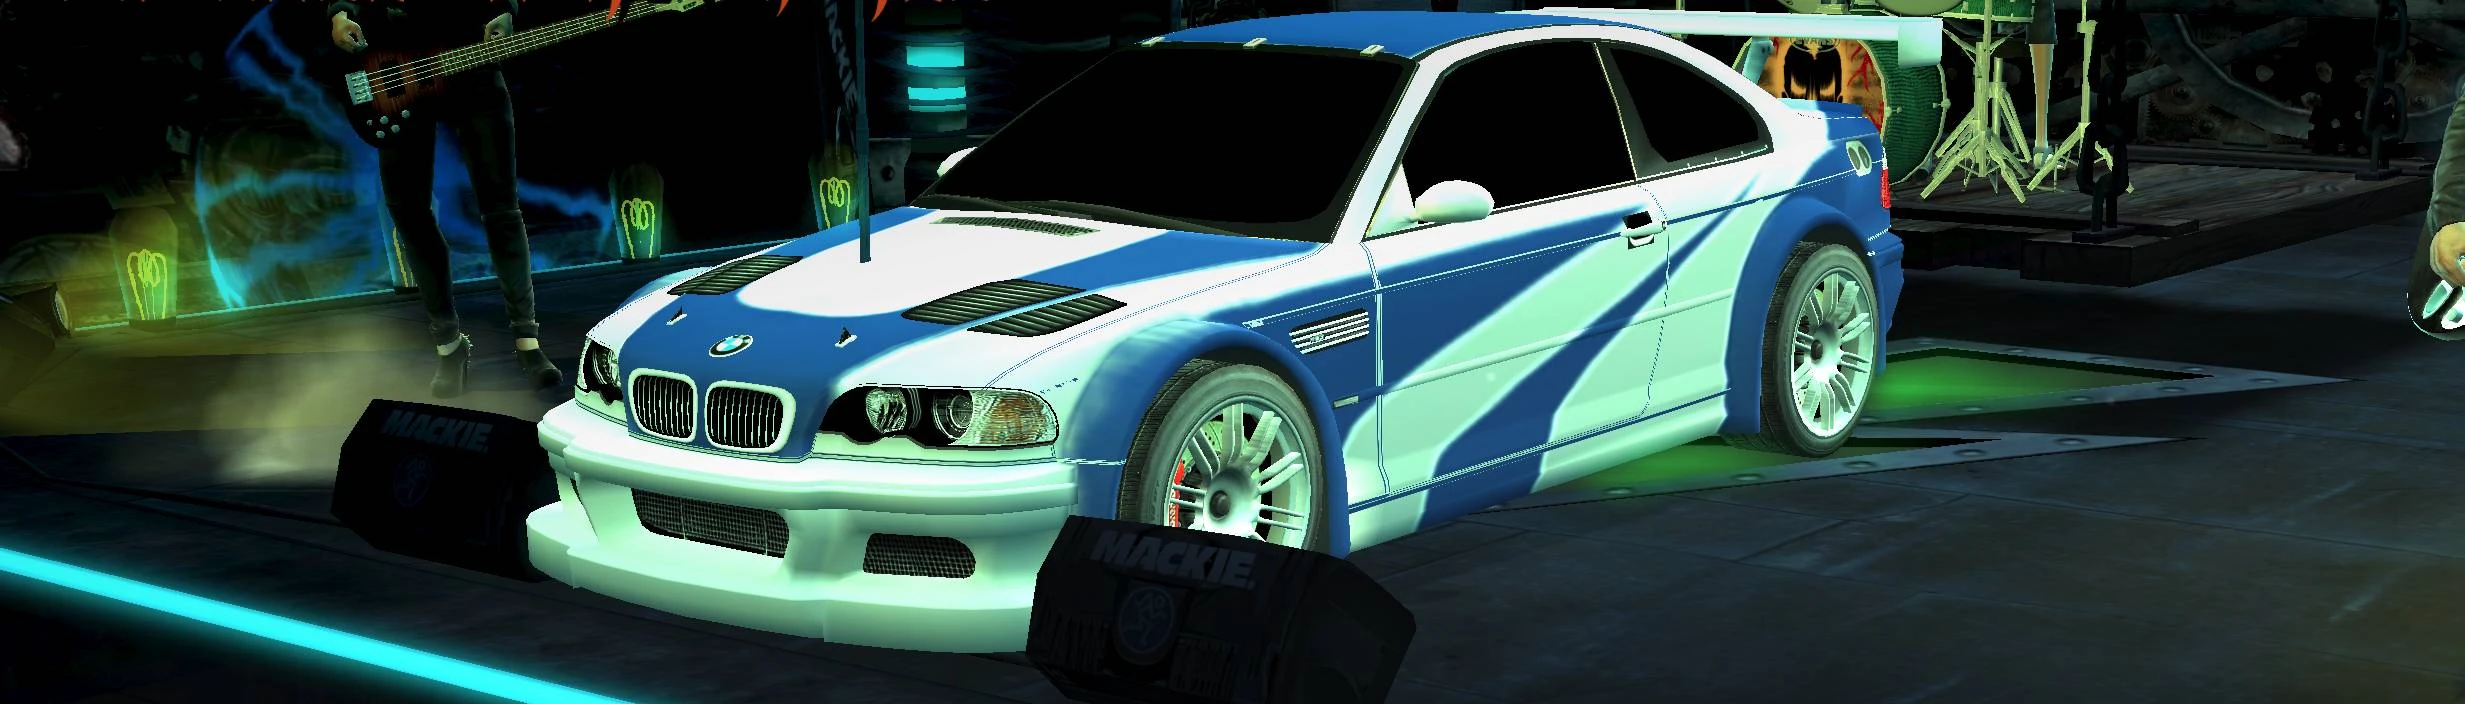 BMW M3 Need for speed Most Wanted